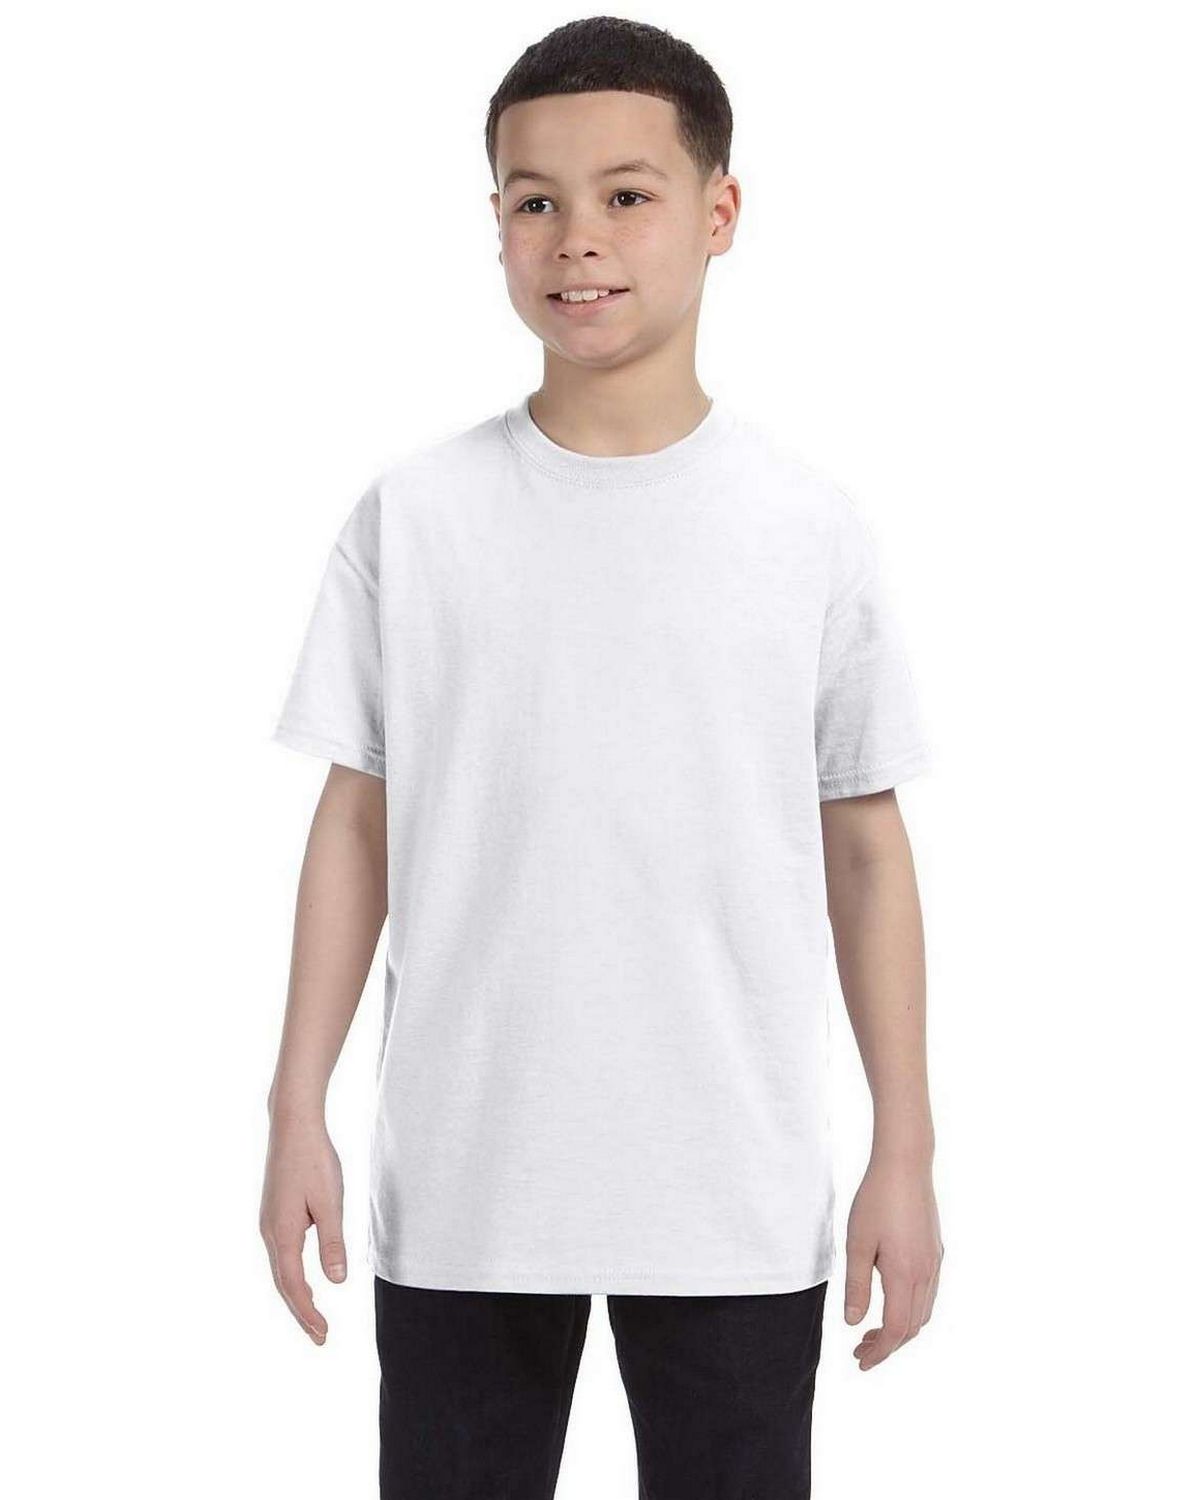 Size Chart for Hanes 54500 Youth Tagless T-Shirt